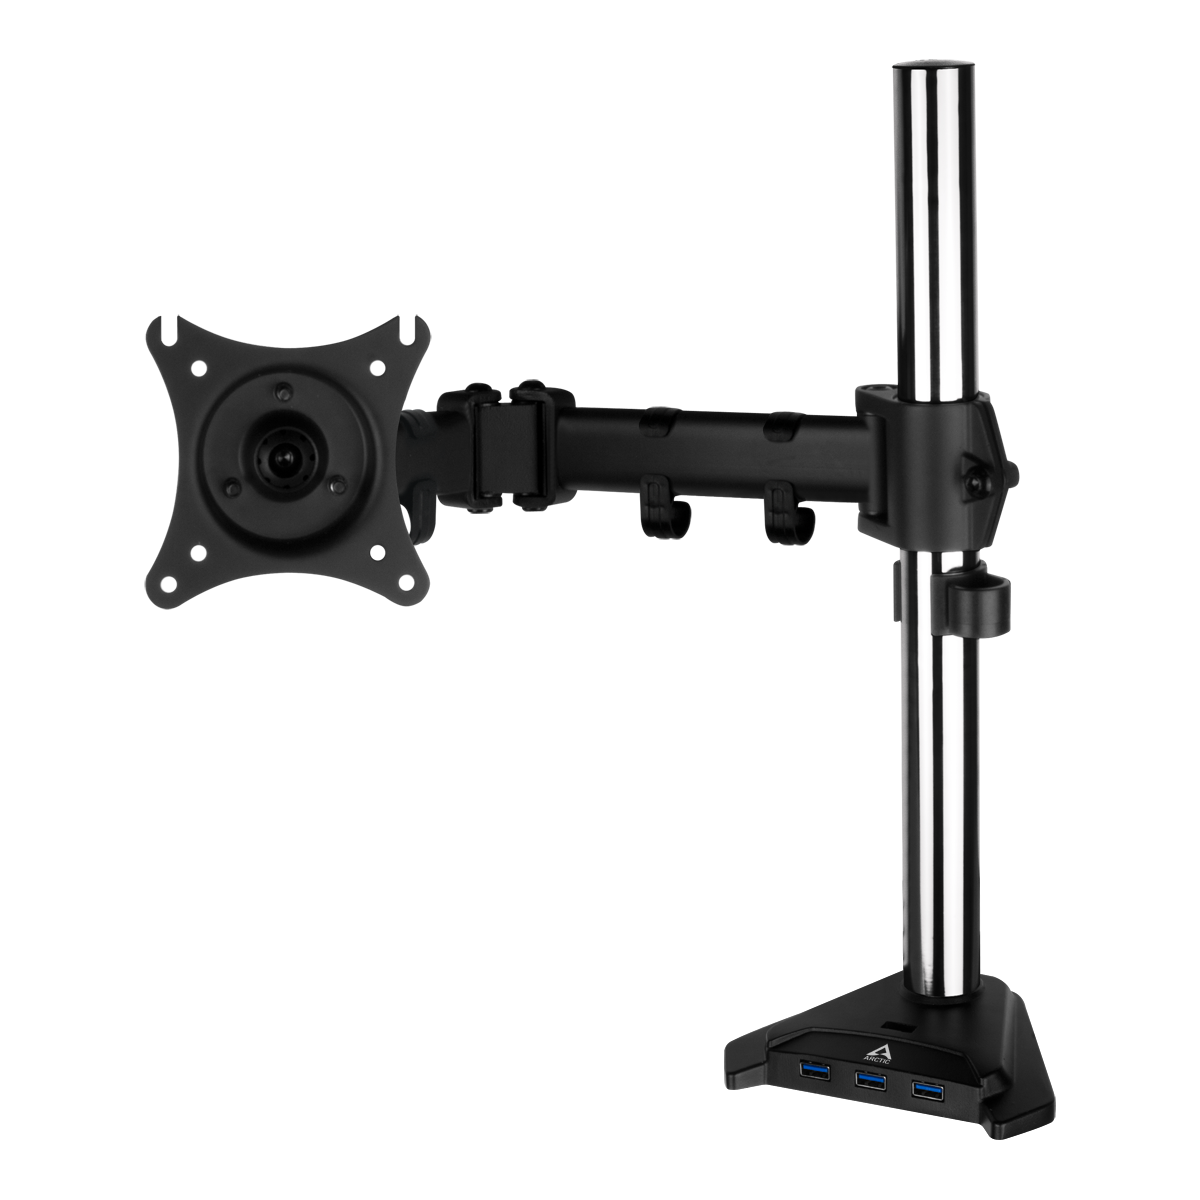 Z1 Pro (Gen 3), Desk Mount Monitor Arm with SuperSpeed USB Hub